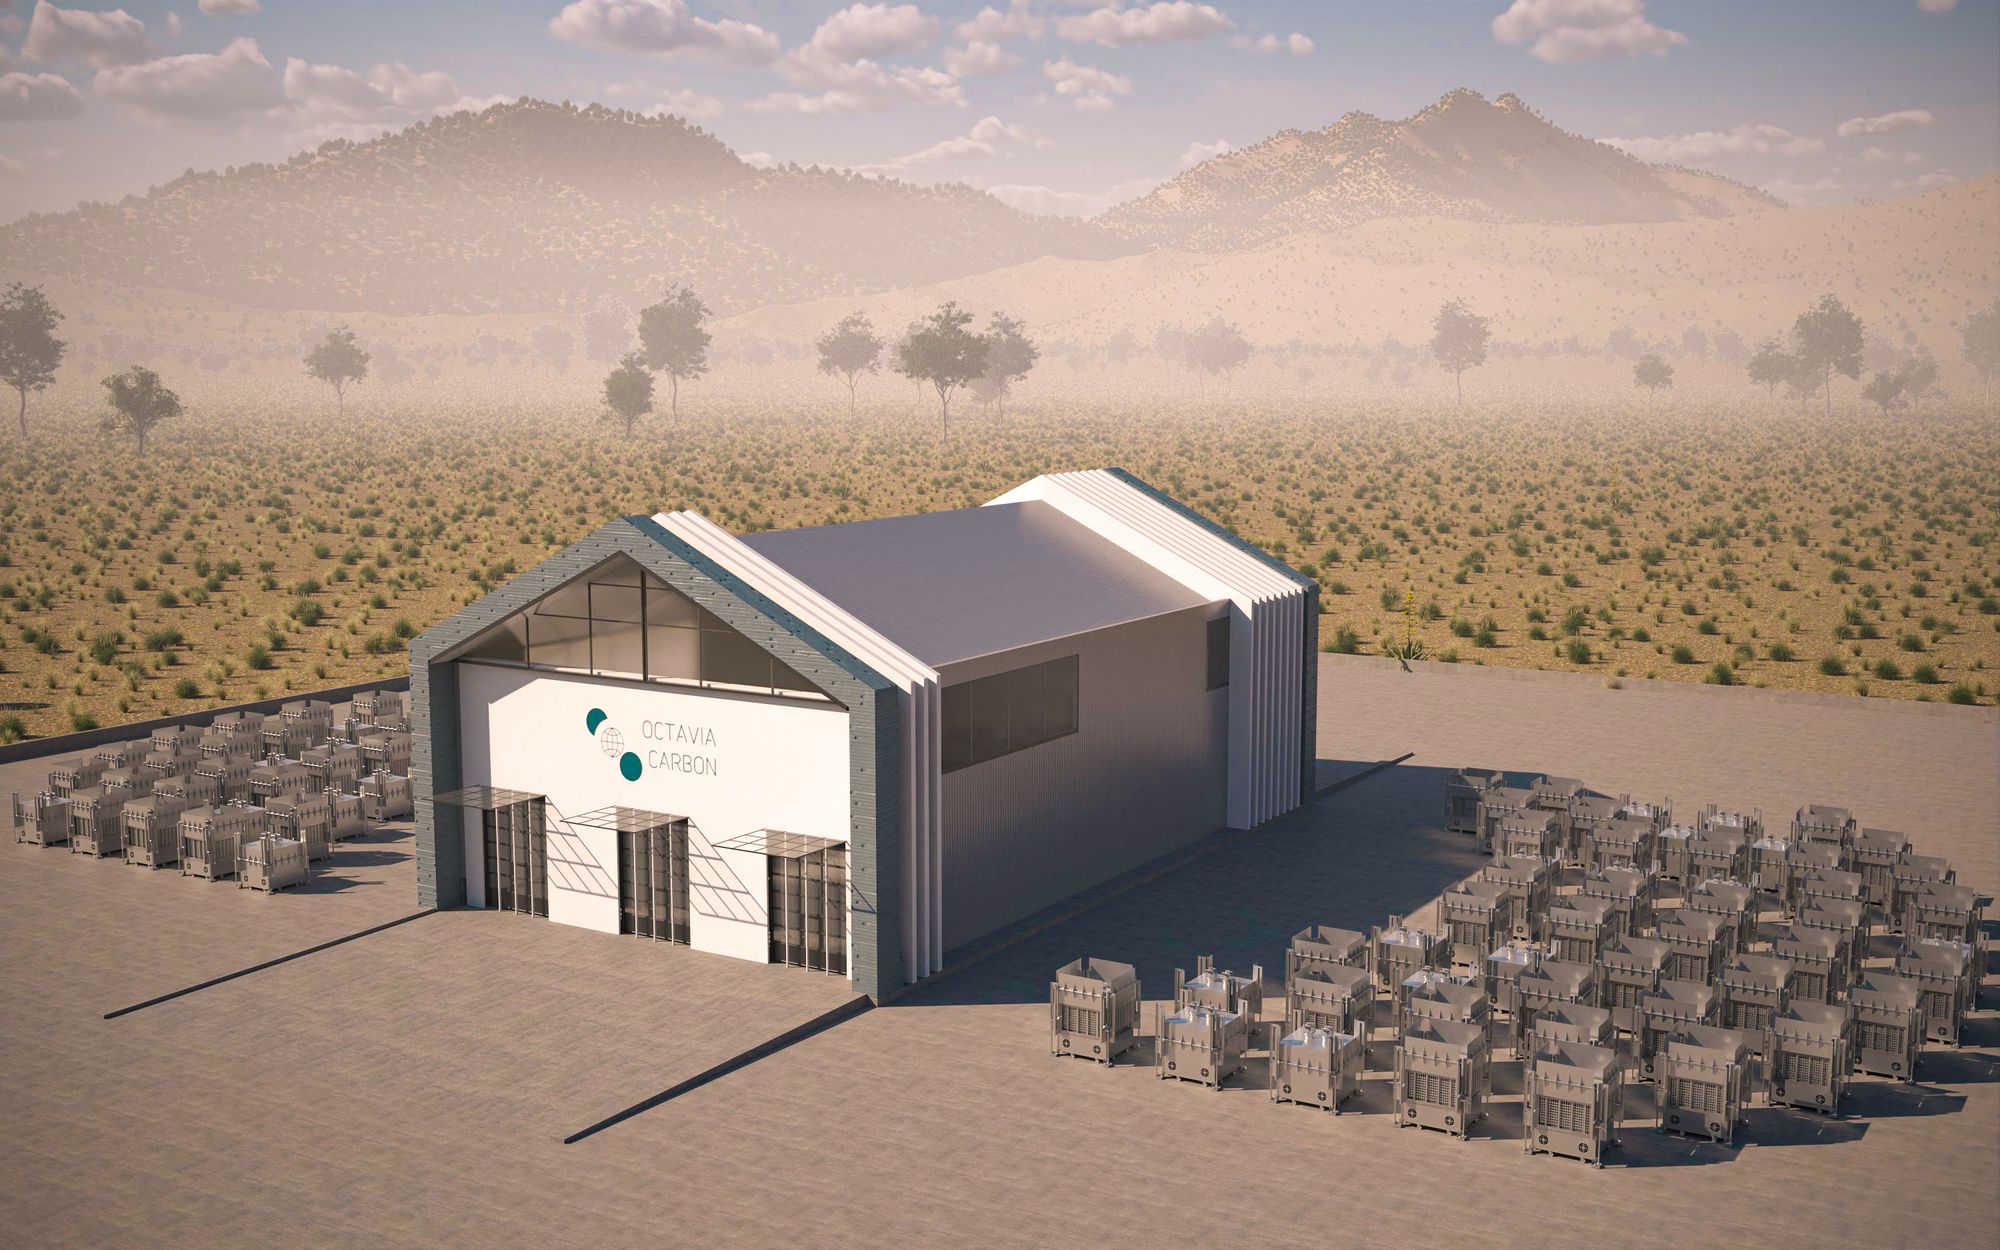 Artist rendering of the planned Octavia Carbon DACS facility